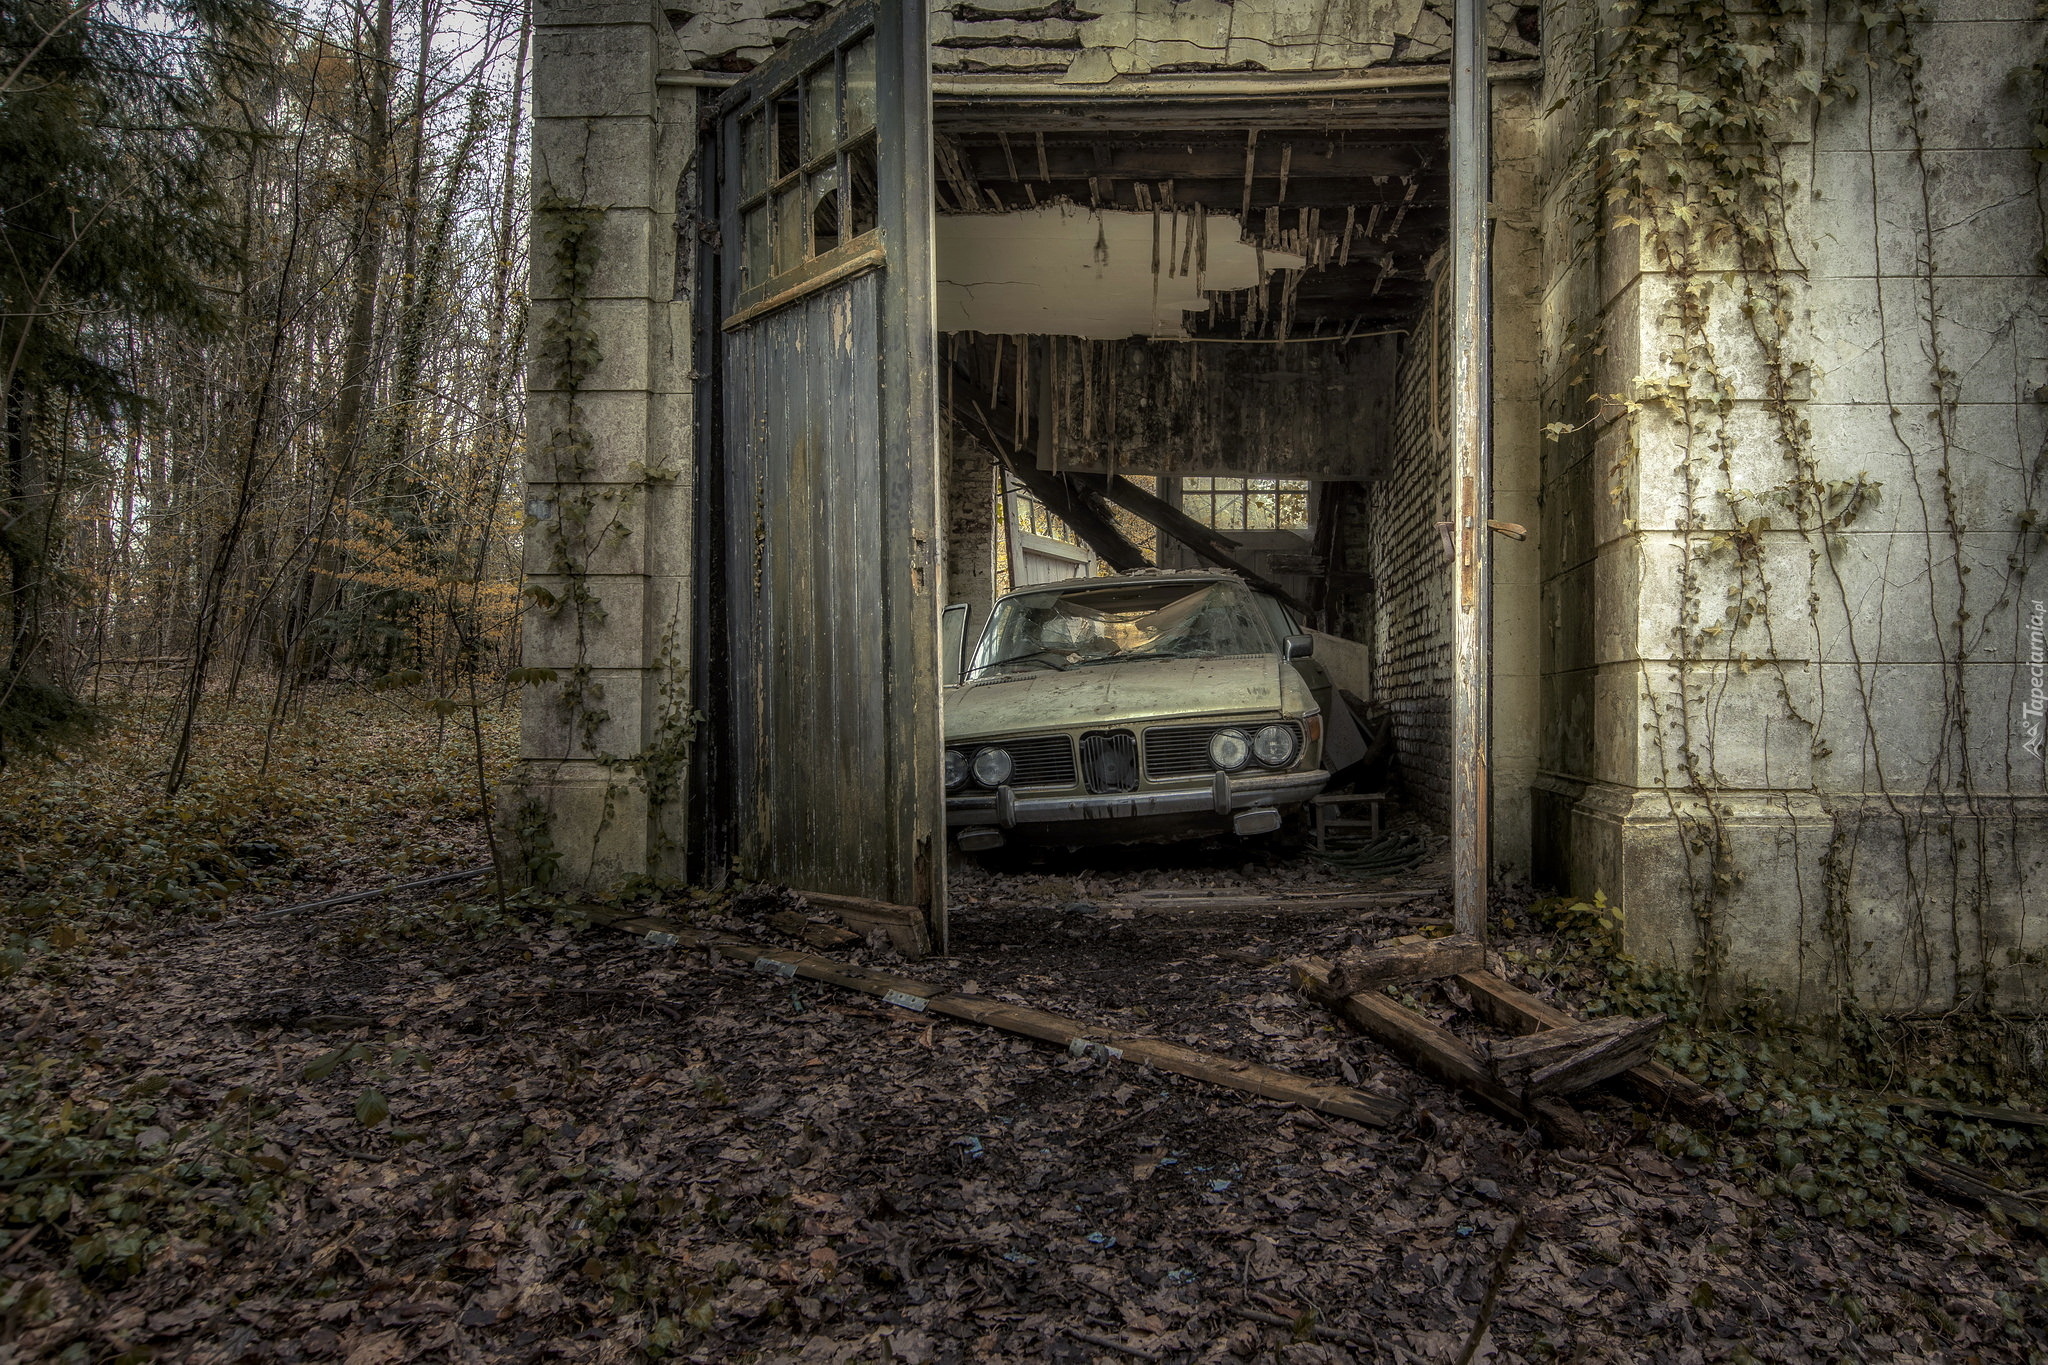 Some abandoned